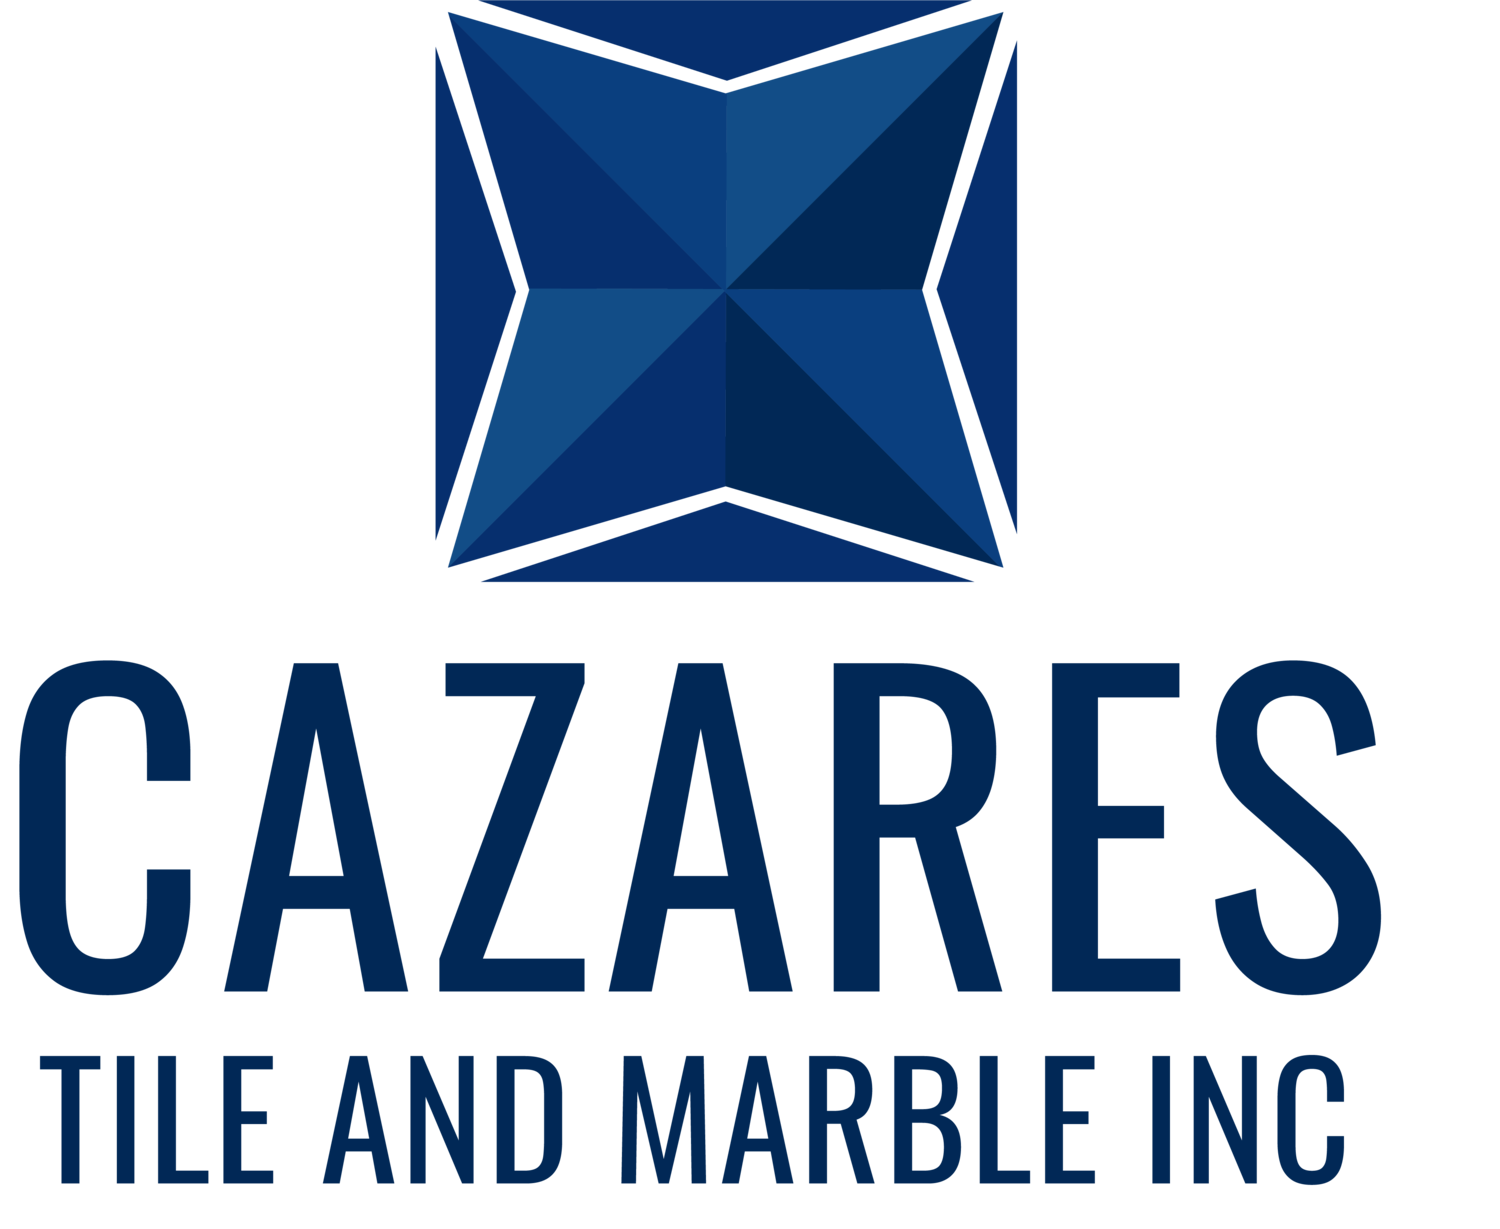 Cazares Tile and Marble